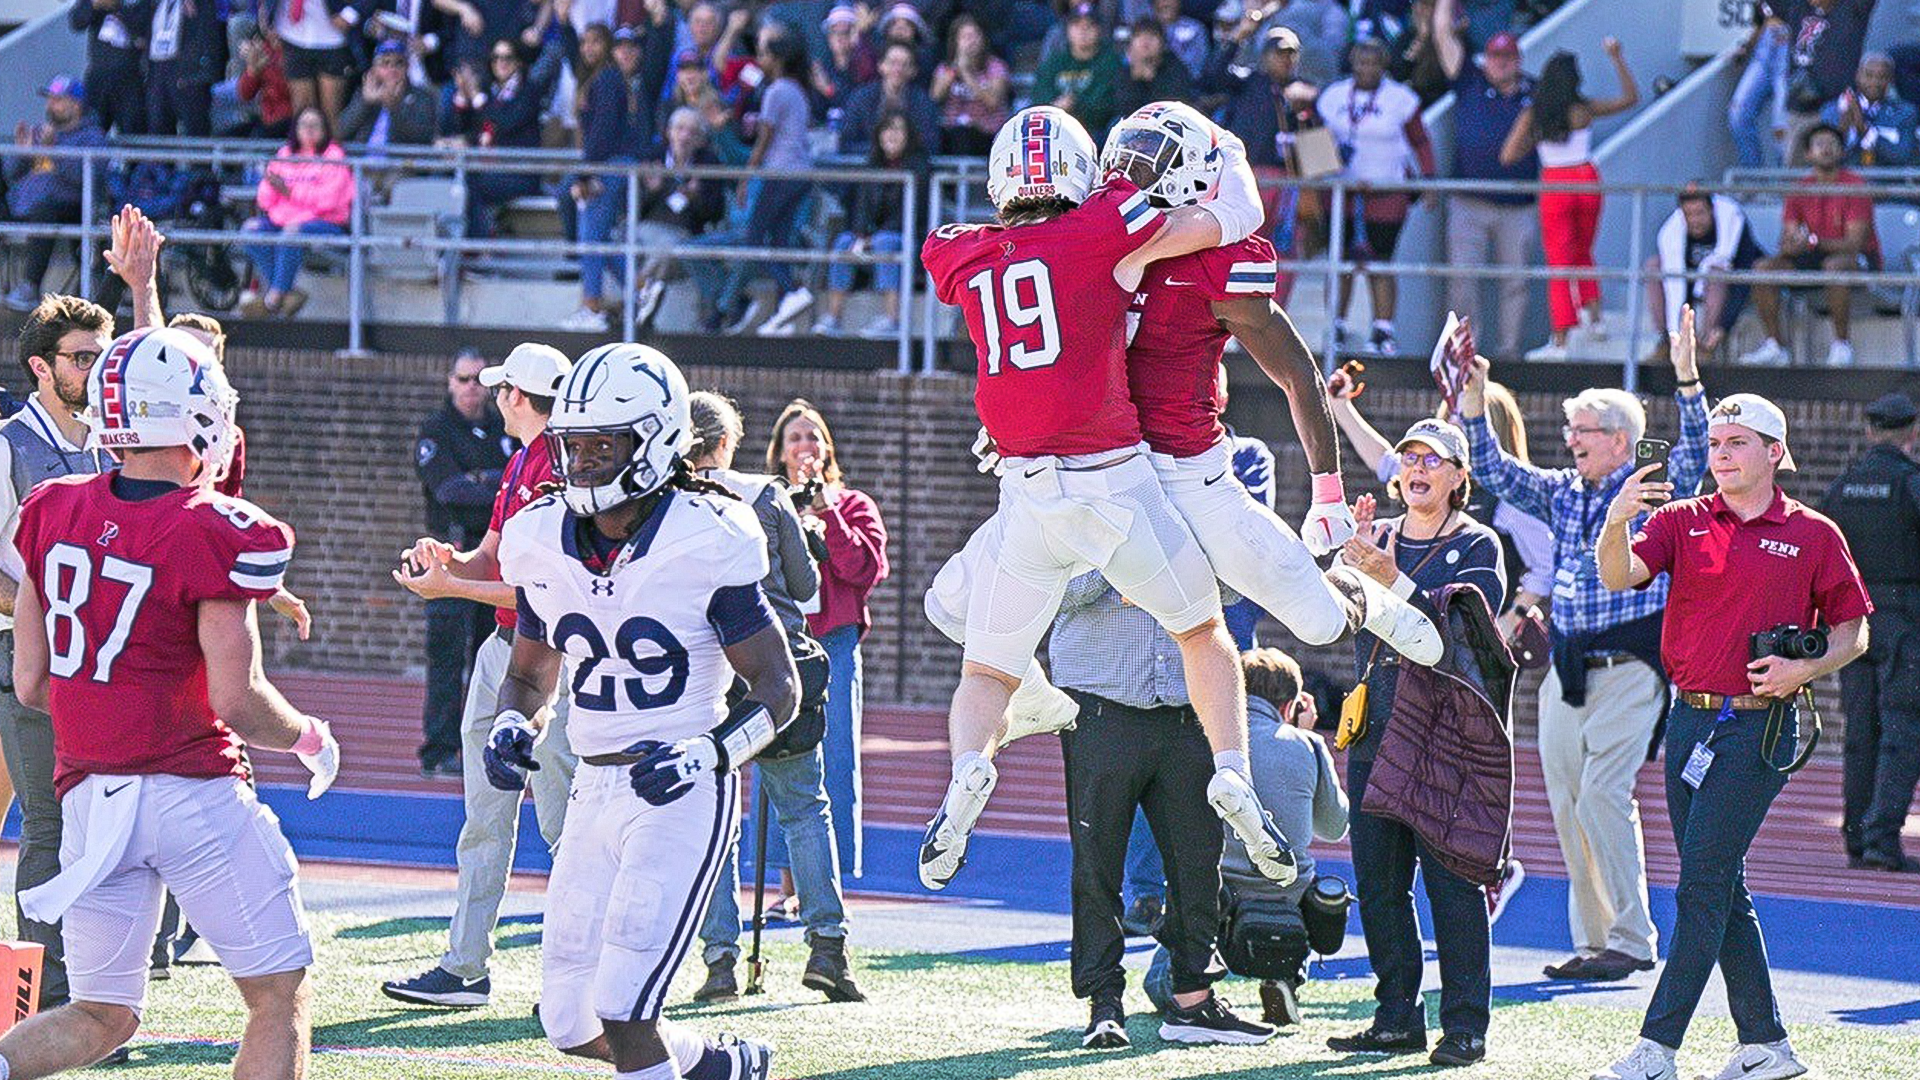 Fourth-year wide receiver Malone Howley (No. 19) celebrates with a teammate during Penn’s 20-13 win over Yale on Saturday at Franklin Field. 